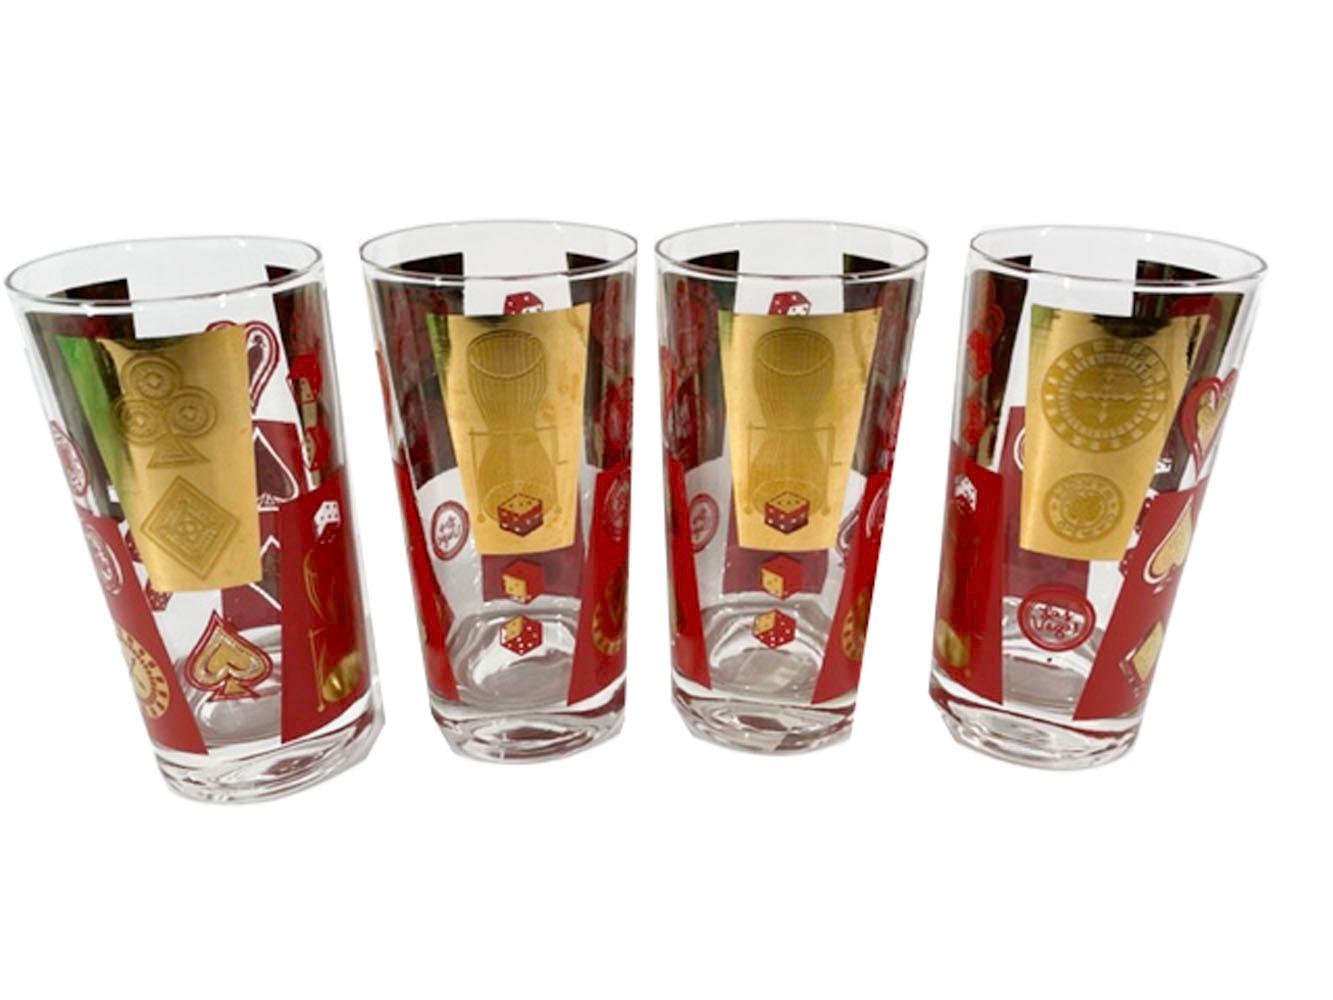 Mid-Century Modern highball glasses with casino / gambling motifs, including card suits, roulette wheels, dice and poker chips in red enamel and 22 karat gold on clear glass.